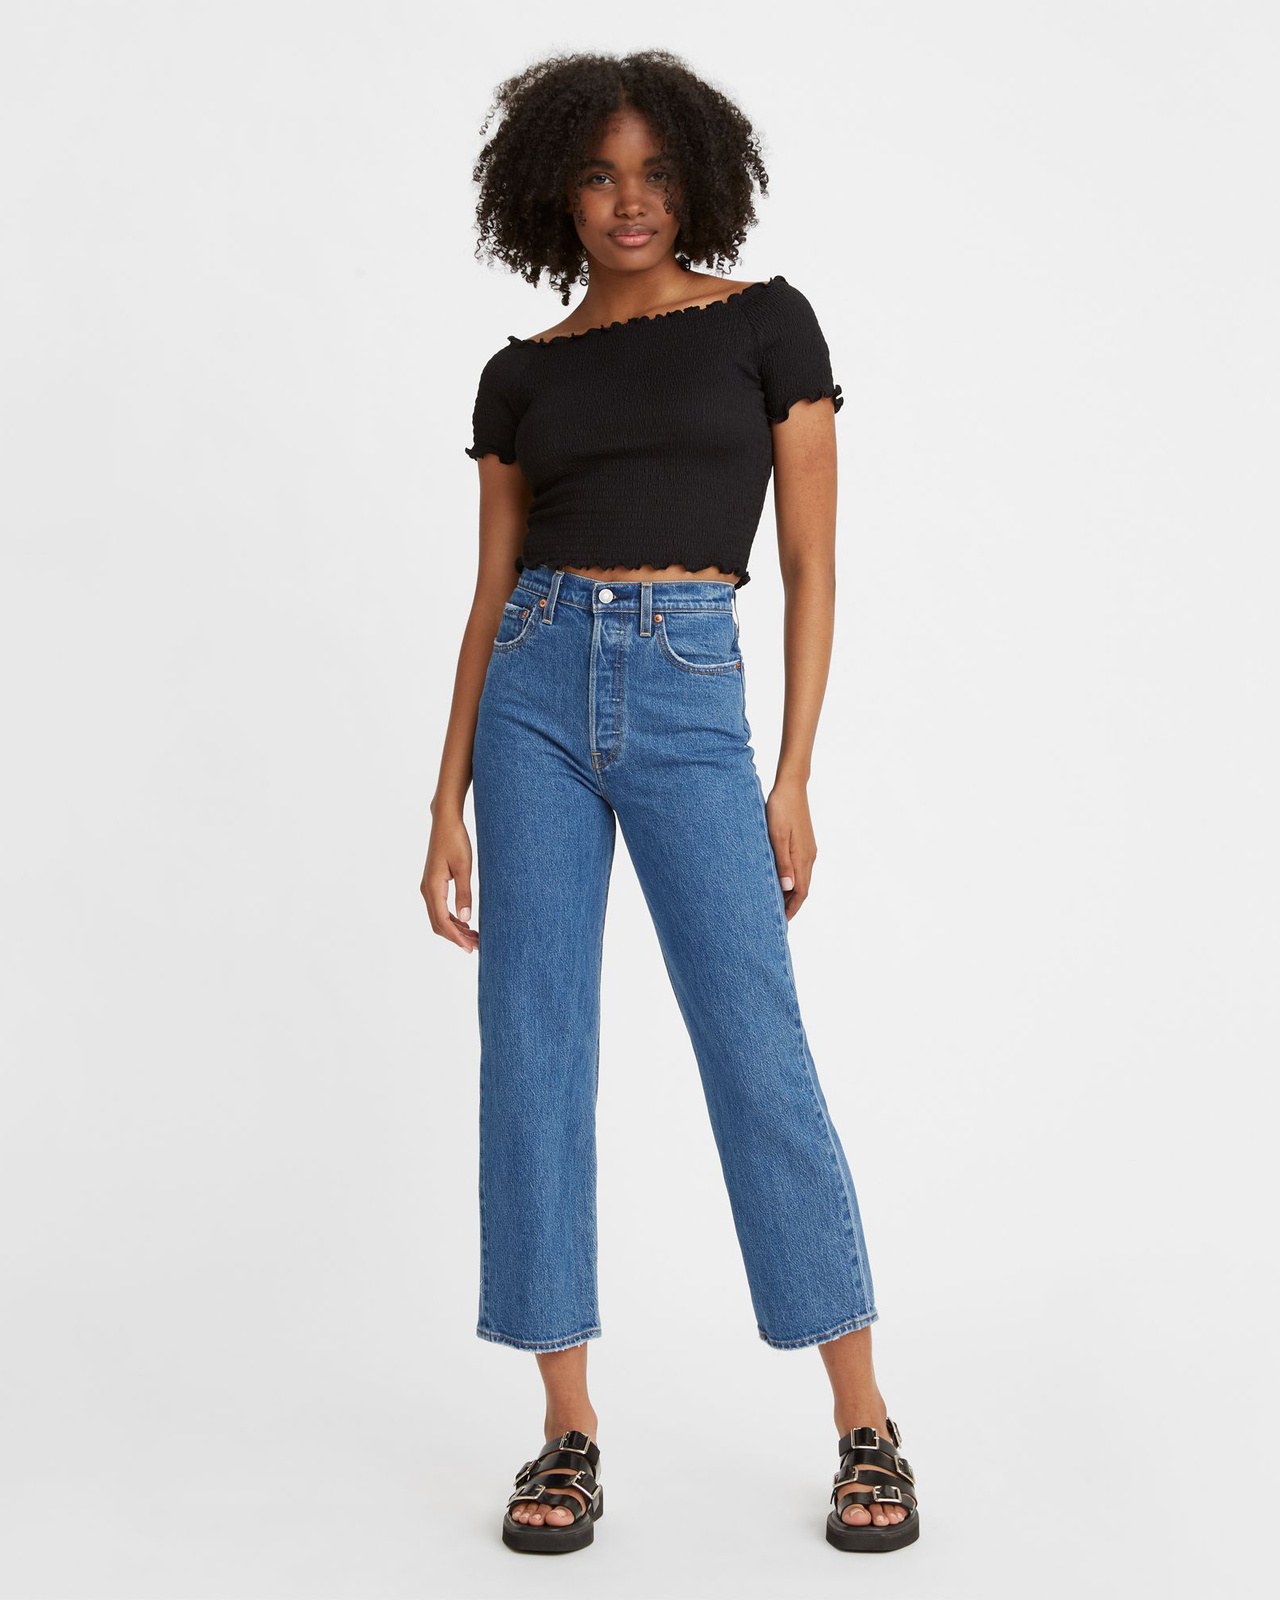 Jeans Ribcage Straight Ankle - Jazz Pop - 30/29